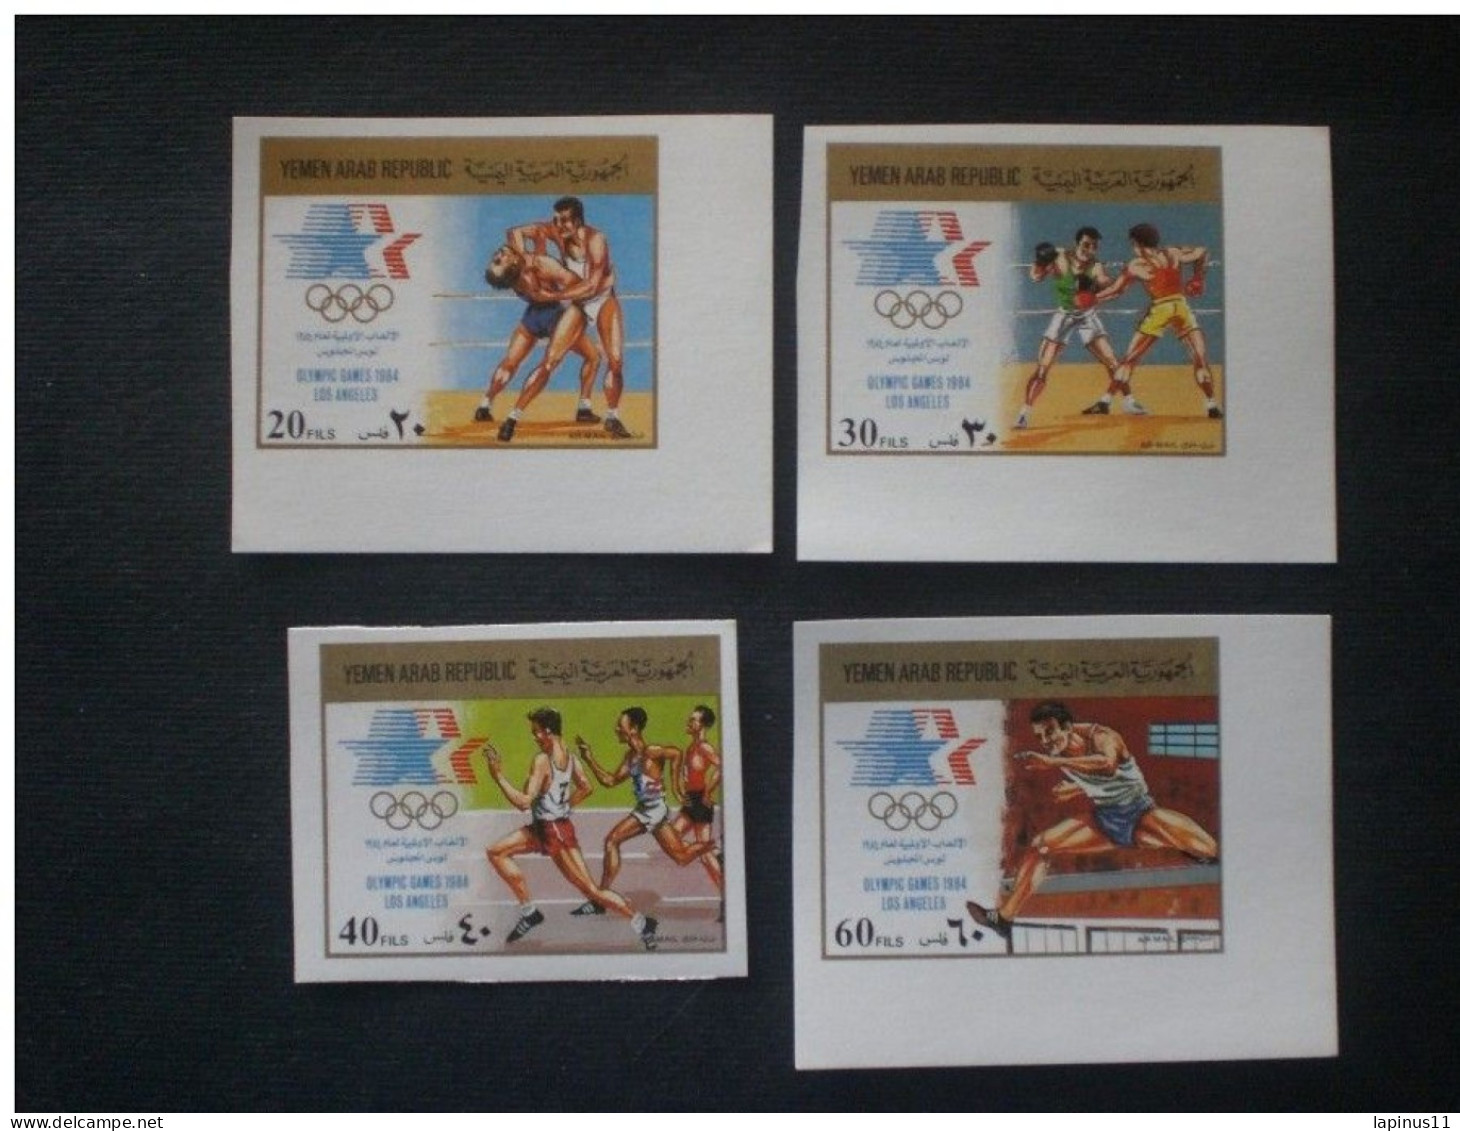 YEMEN 1985 Airmail - Olympic Games - Los Angeles 1984, USA MNH IMPERF !!!! RARE!!! SERIES COMPLETE - Jemen